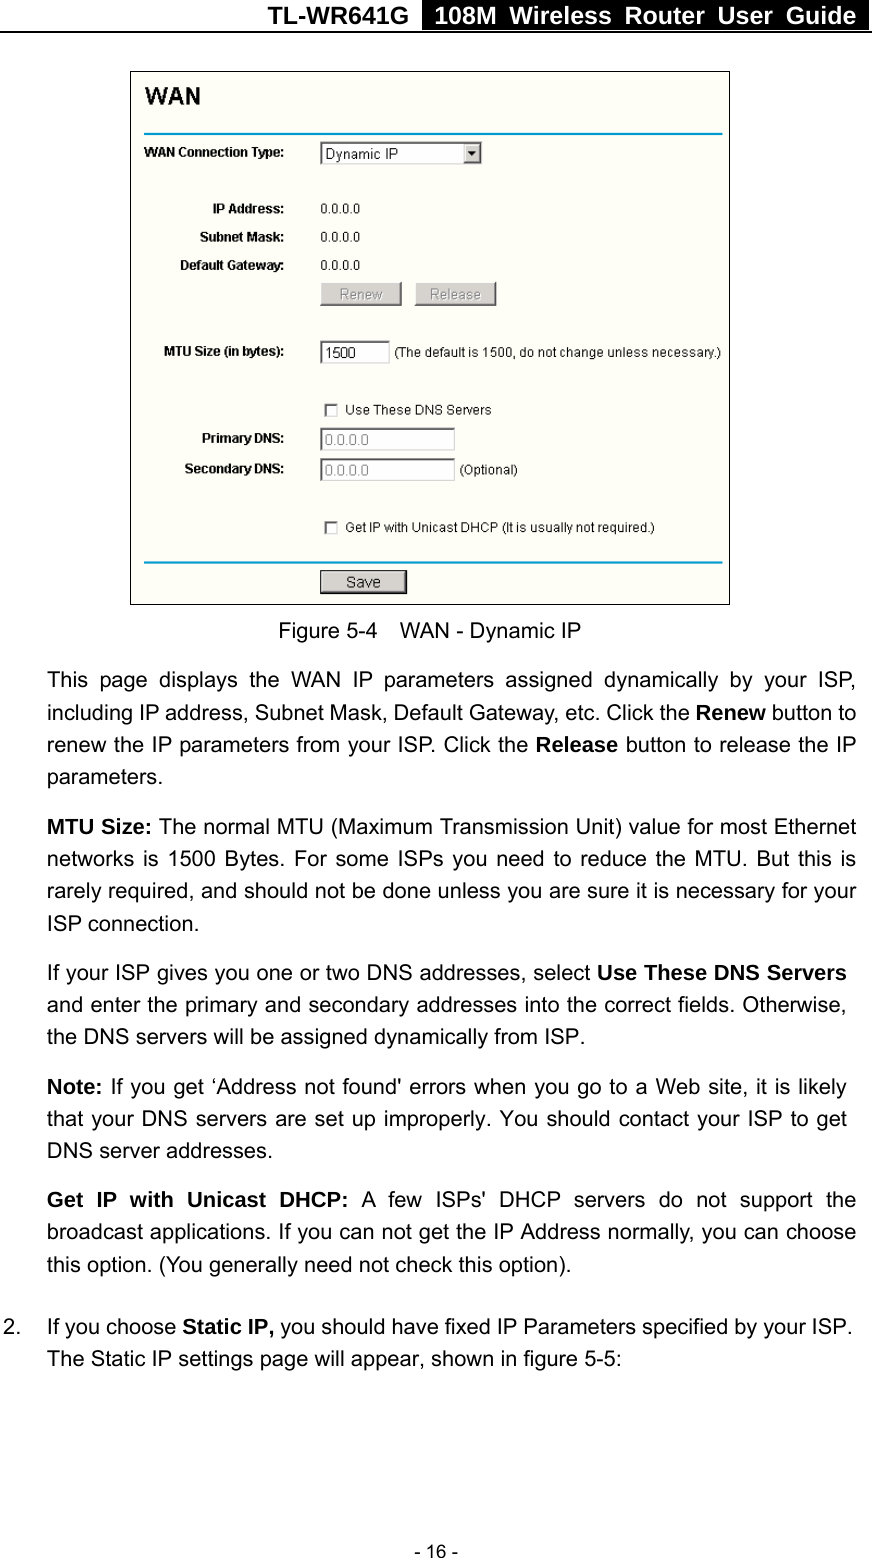 TL-WR641G   108M Wireless Router User Guide   - 16 - Figure 5-4    WAN - Dynamic IP This page displays the WAN IP parameters assigned dynamically by your ISP, including IP address, Subnet Mask, Default Gateway, etc. Click the Renew button to renew the IP parameters from your ISP. Click the Release button to release the IP parameters. MTU Size: The normal MTU (Maximum Transmission Unit) value for most Ethernet networks is 1500 Bytes. For some ISPs you need to reduce the MTU. But this is rarely required, and should not be done unless you are sure it is necessary for your ISP connection. If your ISP gives you one or two DNS addresses, select Use These DNS Servers and enter the primary and secondary addresses into the correct fields. Otherwise, the DNS servers will be assigned dynamically from ISP.  Note: If you get ‘Address not found&apos; errors when you go to a Web site, it is likely that your DNS servers are set up improperly. You should contact your ISP to get DNS server addresses.   Get IP with Unicast DHCP: A few ISPs&apos; DHCP servers do not support the broadcast applications. If you can not get the IP Address normally, you can choose this option. (You generally need not check this option). 2.  If you choose Static IP, you should have fixed IP Parameters specified by your ISP. The Static IP settings page will appear, shown in figure 5-5: 